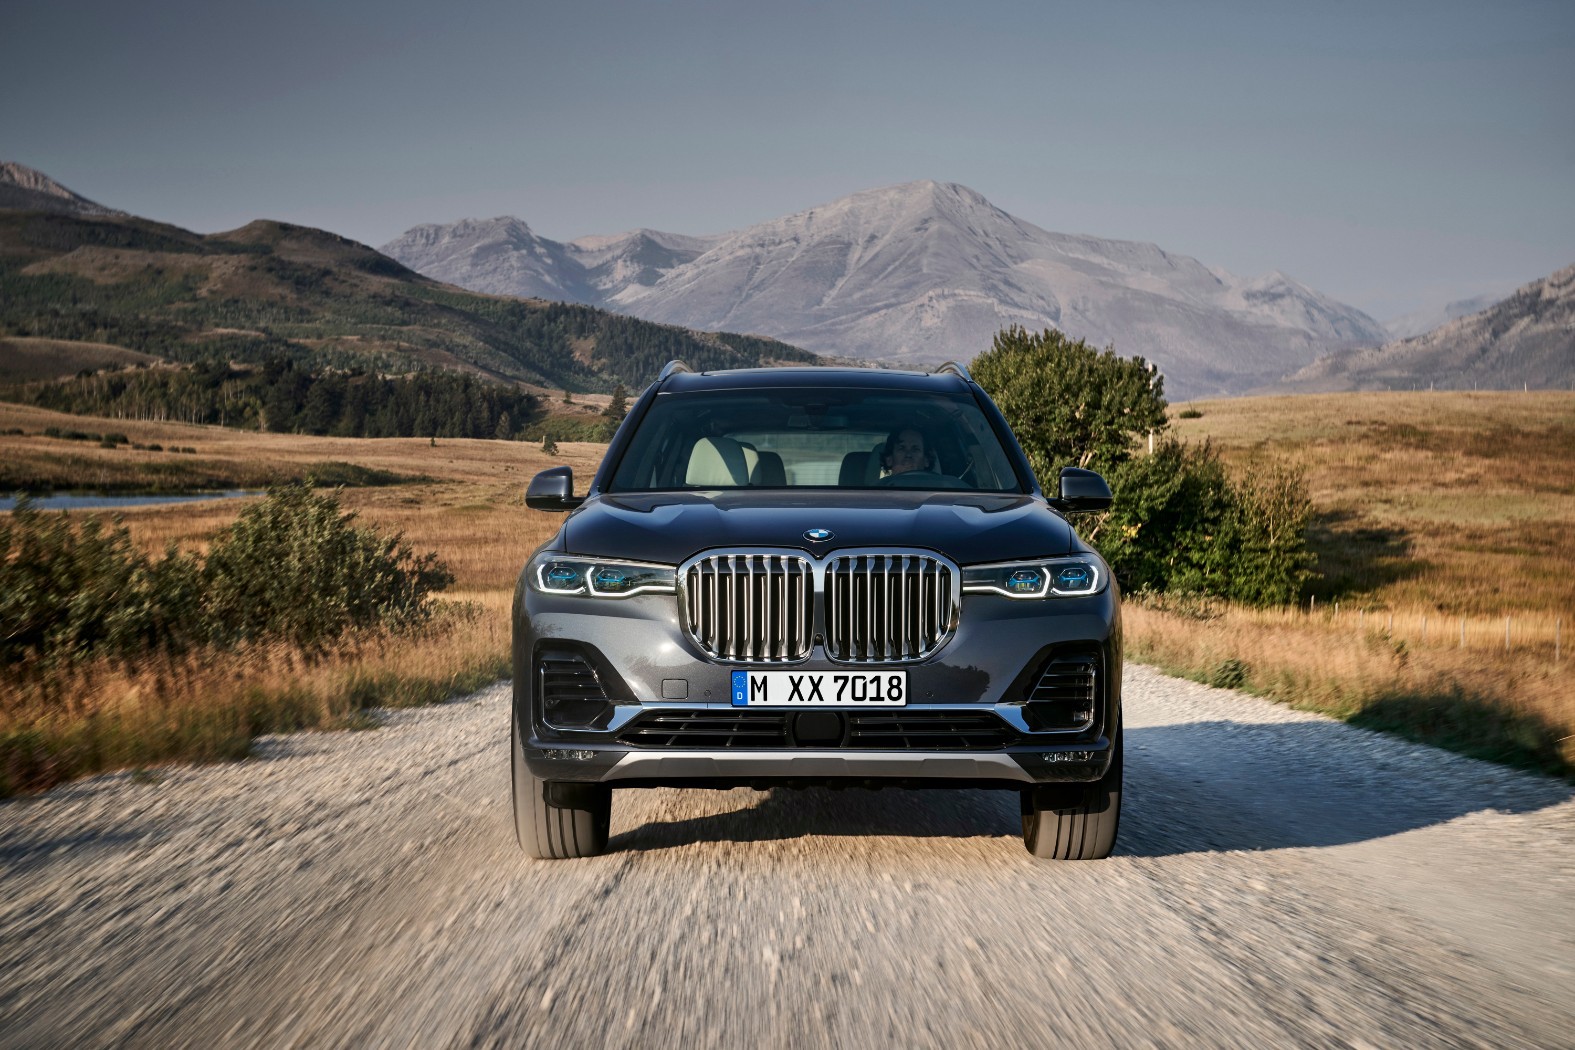 2020 BMW X7 G07 Goes Official With 7 Seats And Gigantic Kidney Grilles